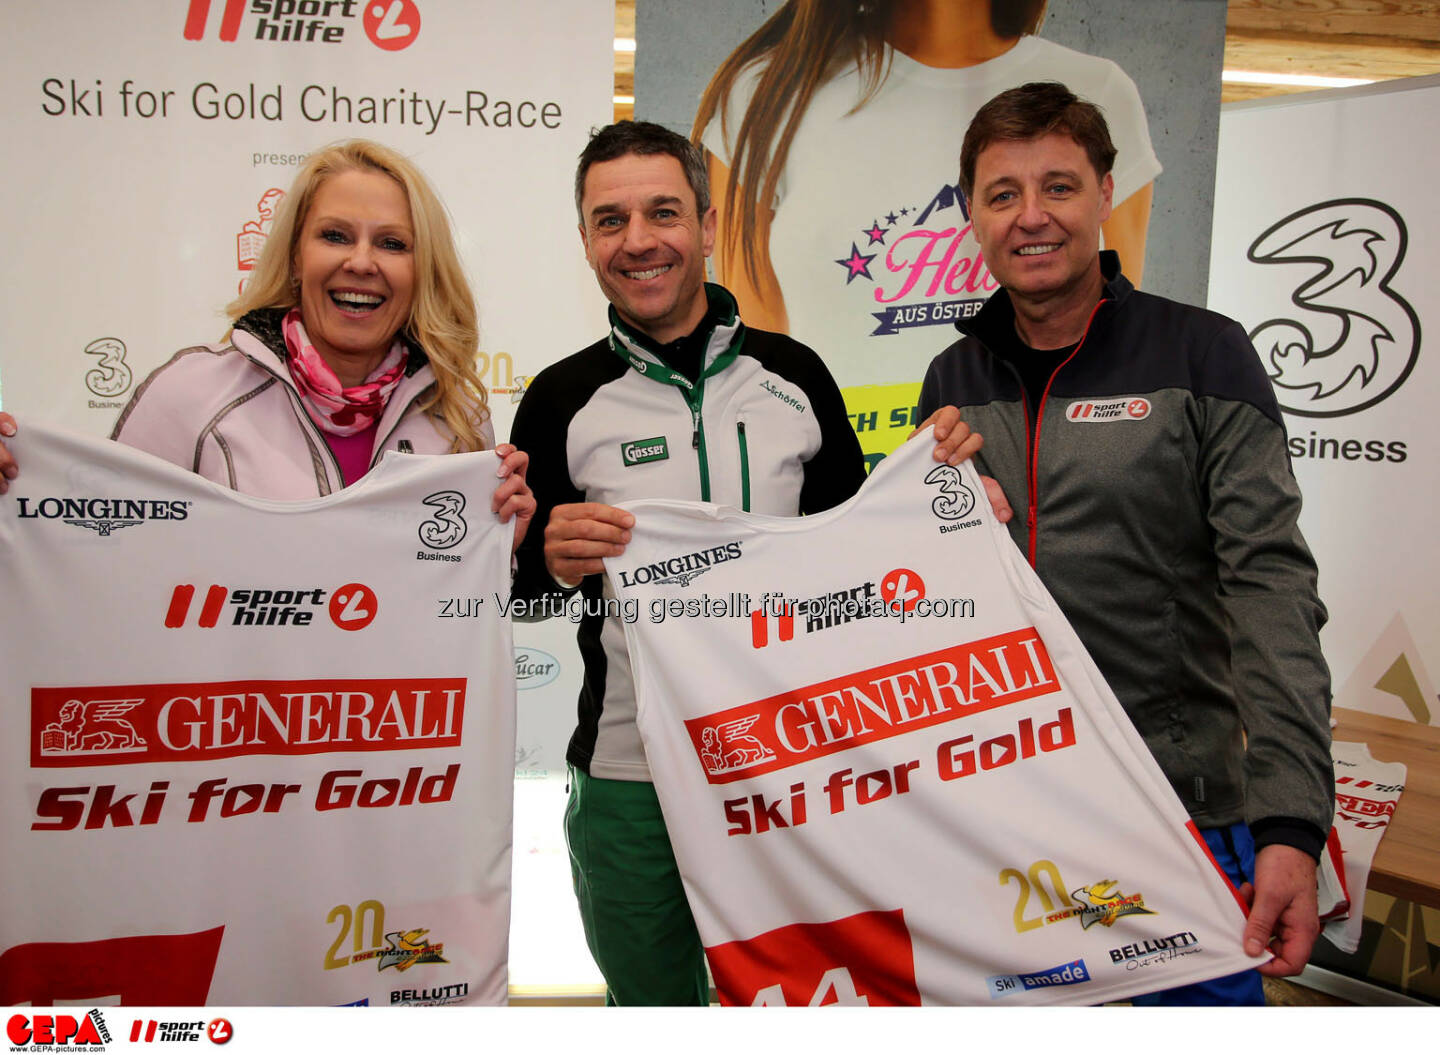 Ski for Gold Charity Race. Image shows Ulrike Kriegler, Thomas Reisenberger and managing director Harald Bauer (Sporthilfe). Photo: GEPA pictures/ Daniel Goetzhaber